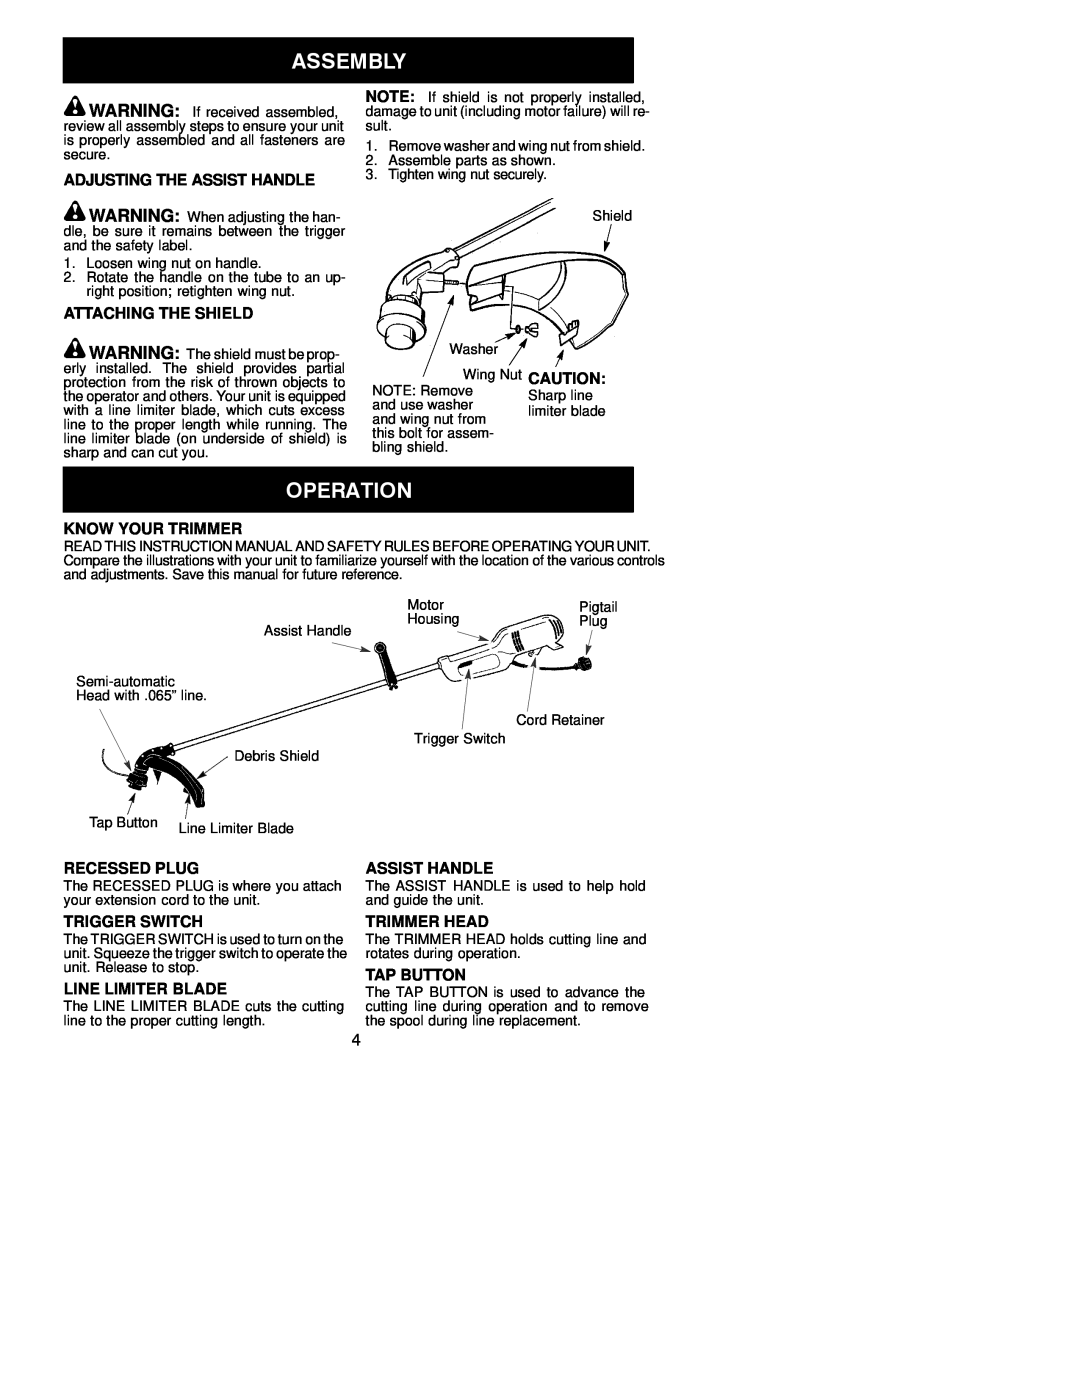 Poulan 530164104 Adjusting The Assist Handle, Attaching The Shield, Know Your Trimmer, Recessed Plug, Trigger Switch 